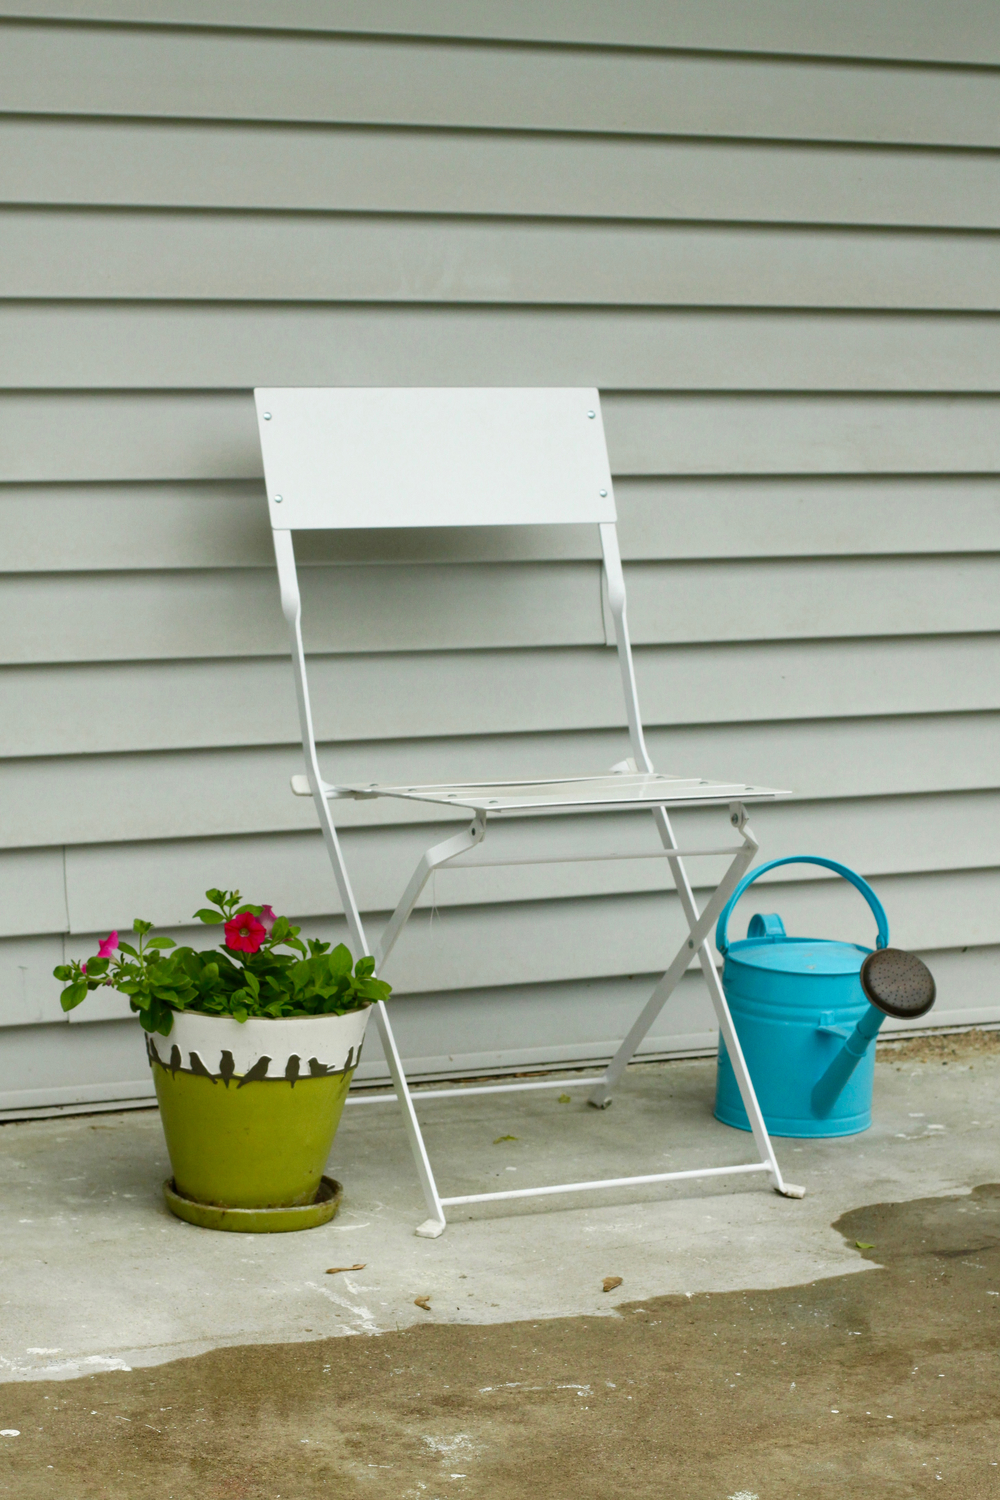 Garden chair, watering can, and flowers